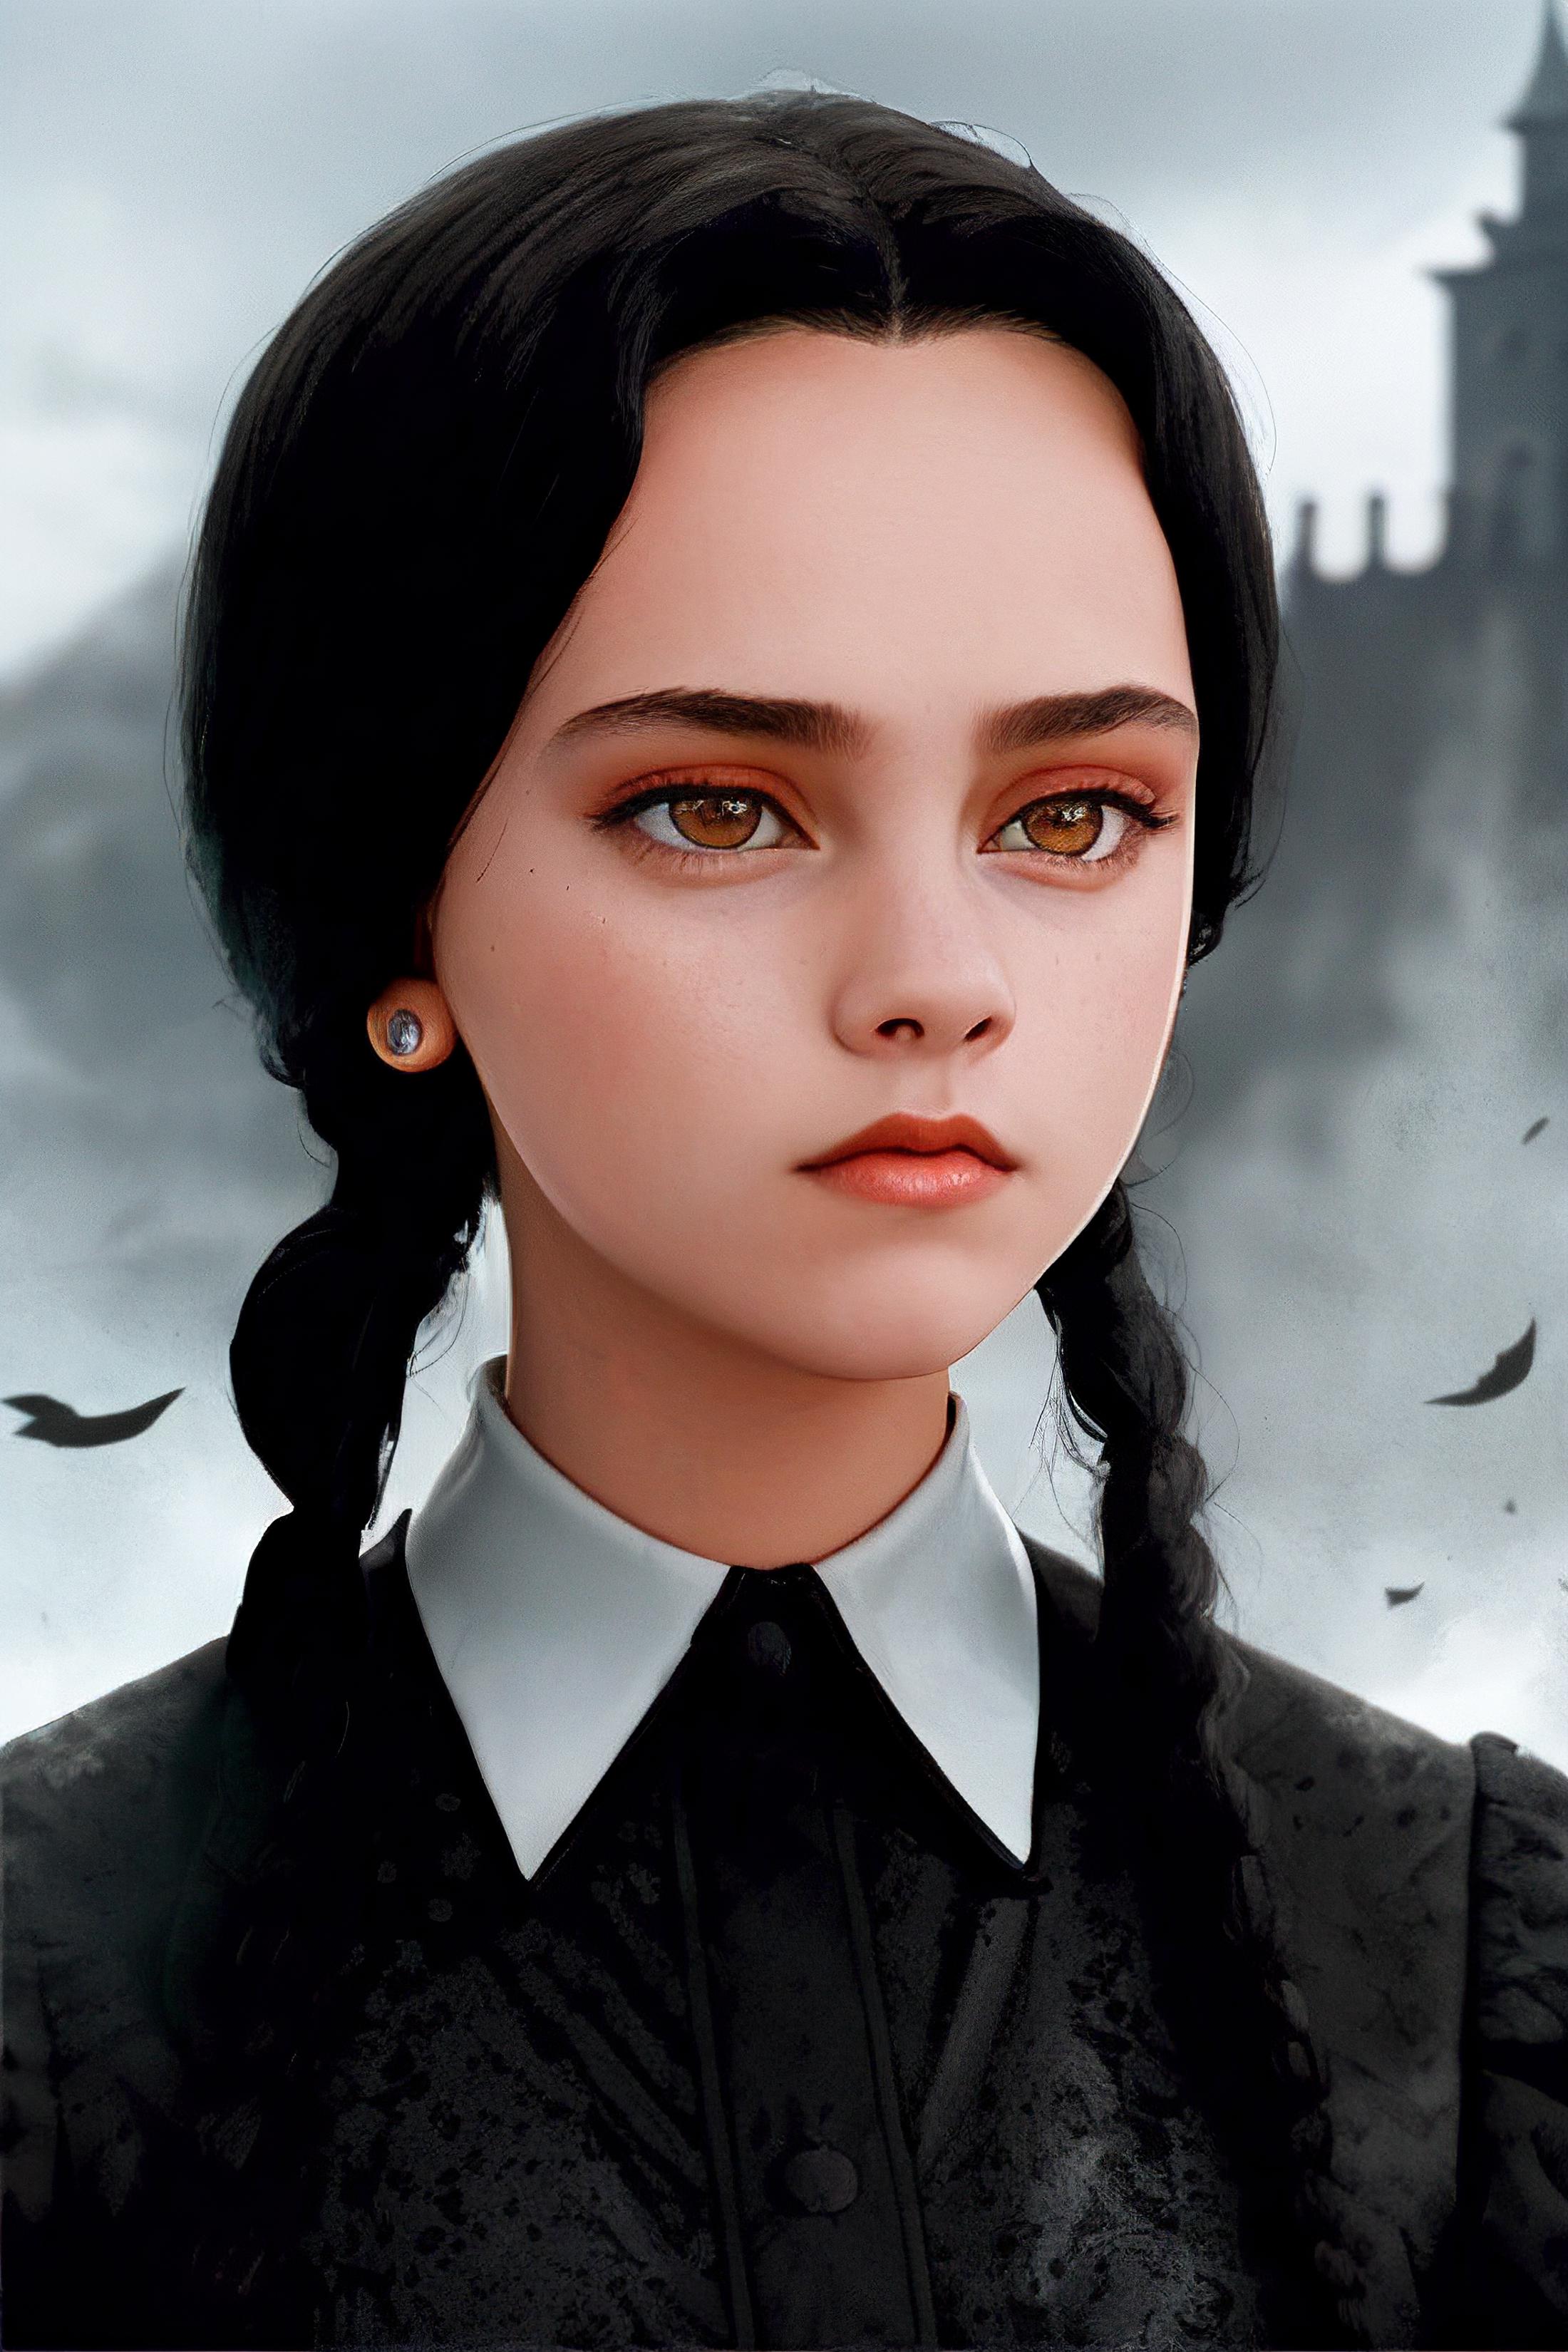 Wednesday Addams | 1990's image by _ABC_